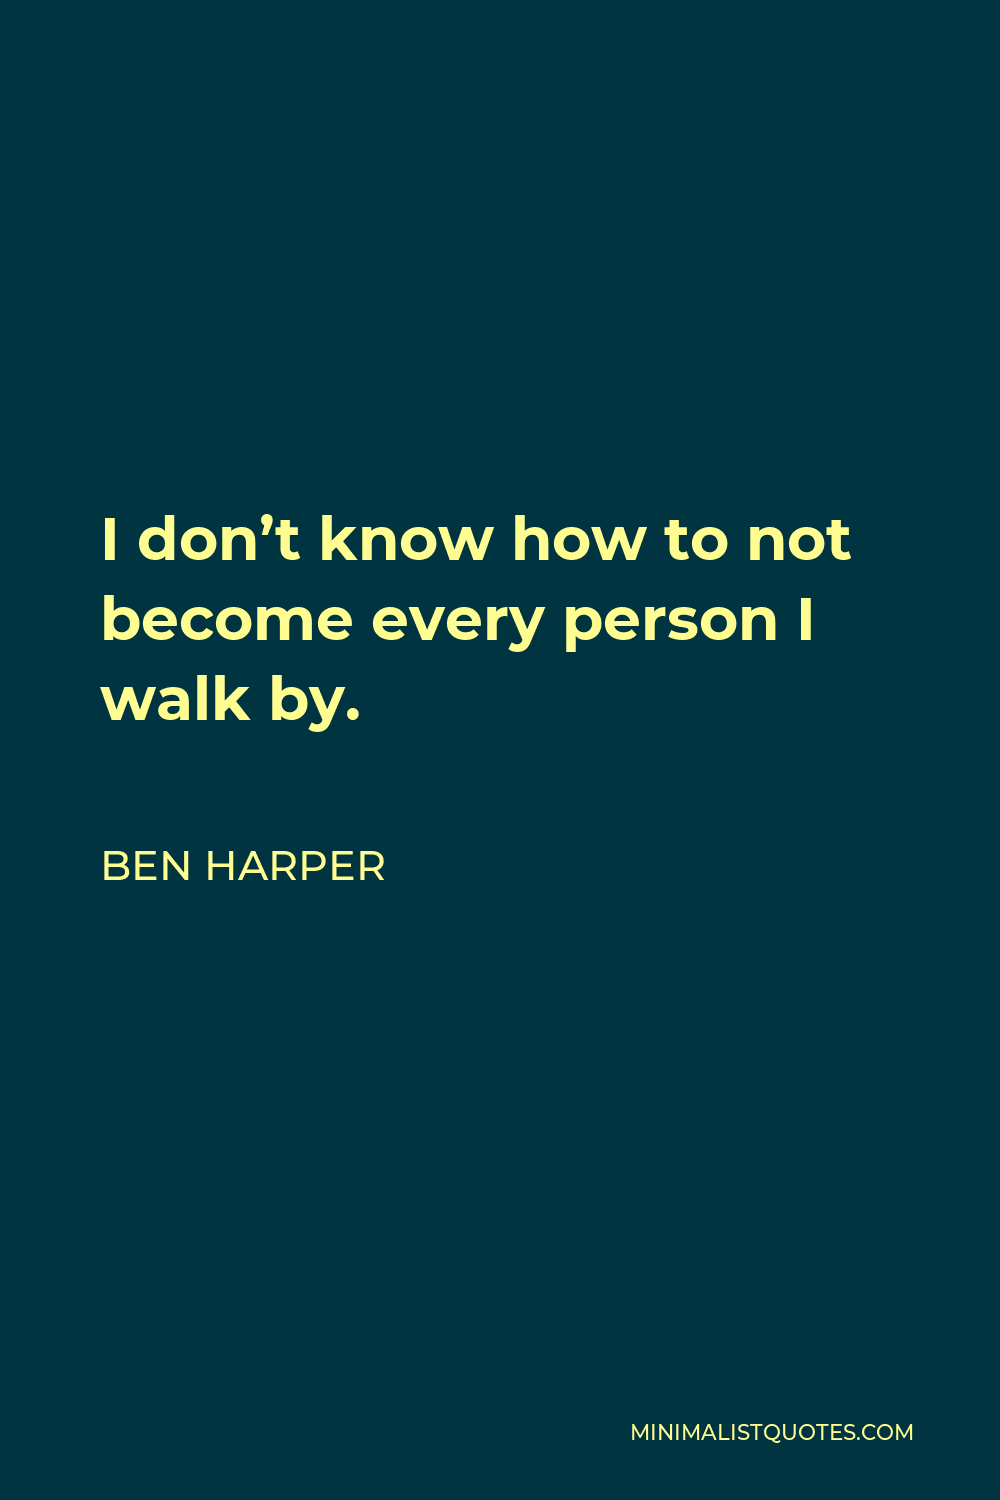 Ben Harper Quote - I don’t know how to not become every person I walk by.